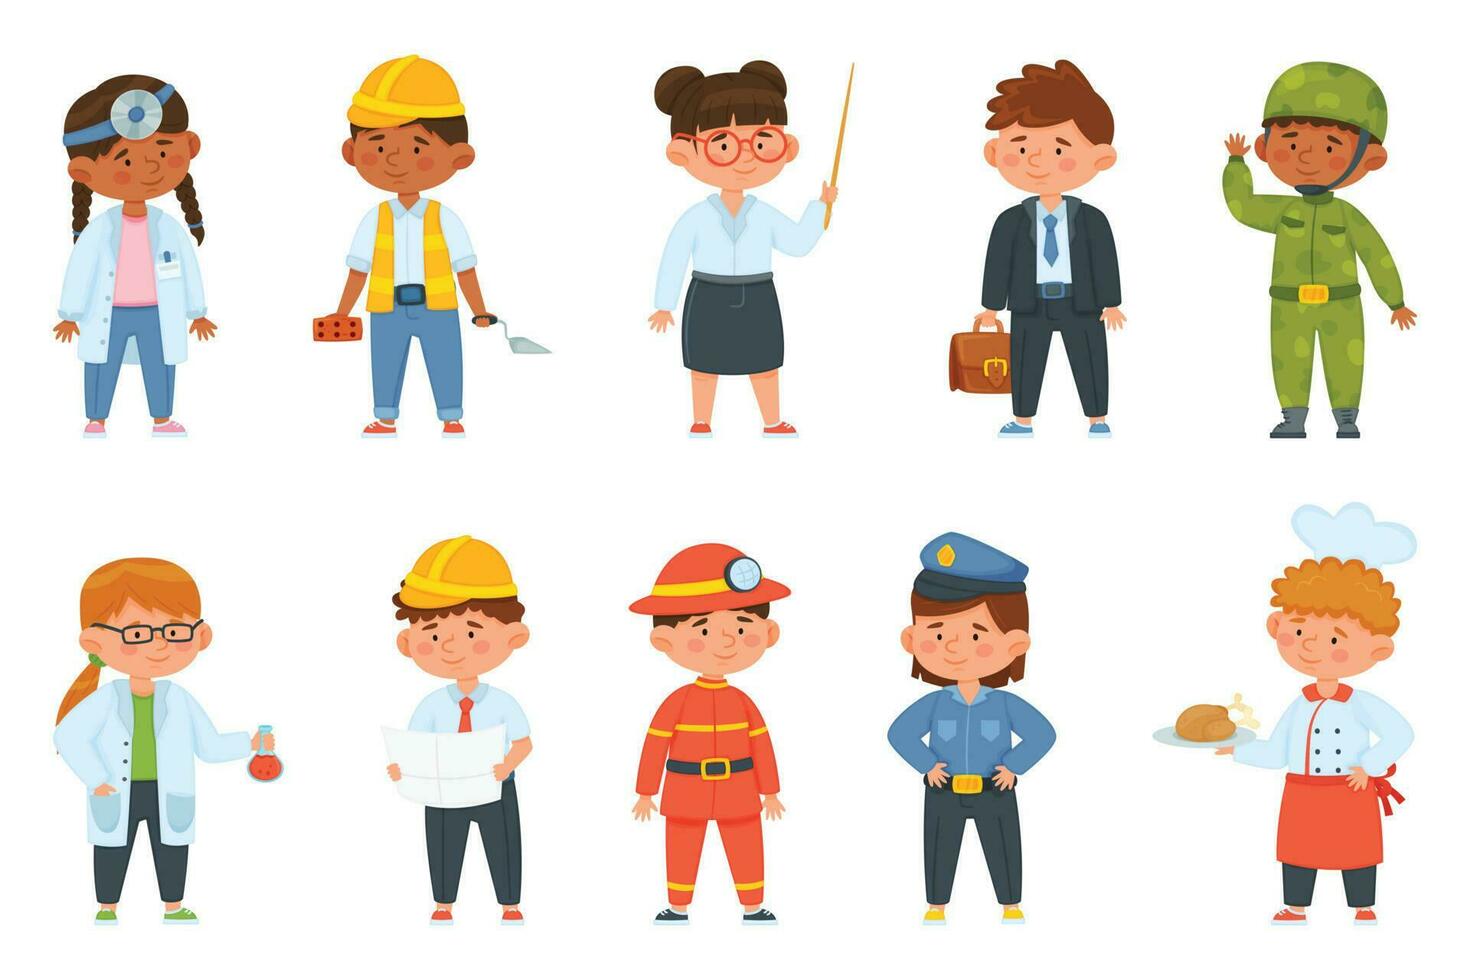 Cartoon kids of different professions, children in professional uniforms. Boy and girl firefighter, doctor, teacher, chef, engineer vector set